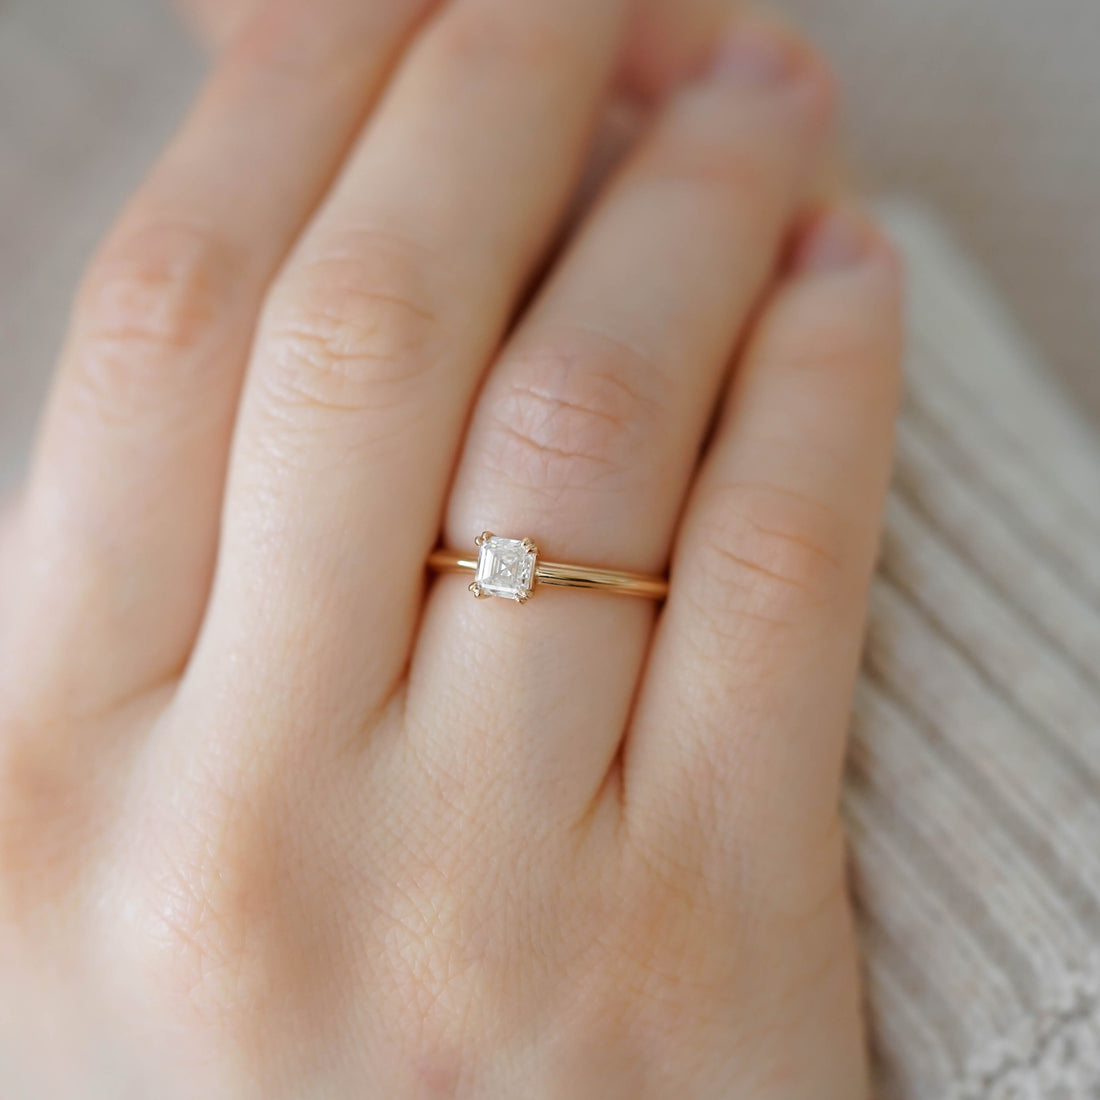 burcu-okut-jewellery-jewelry-natural-diamond-engagement-ring-yalın-asscher-ring-woman-proposal-18K-solid-rose-gold-gift-unique-gia-certificate-elegant-timeless- (1)